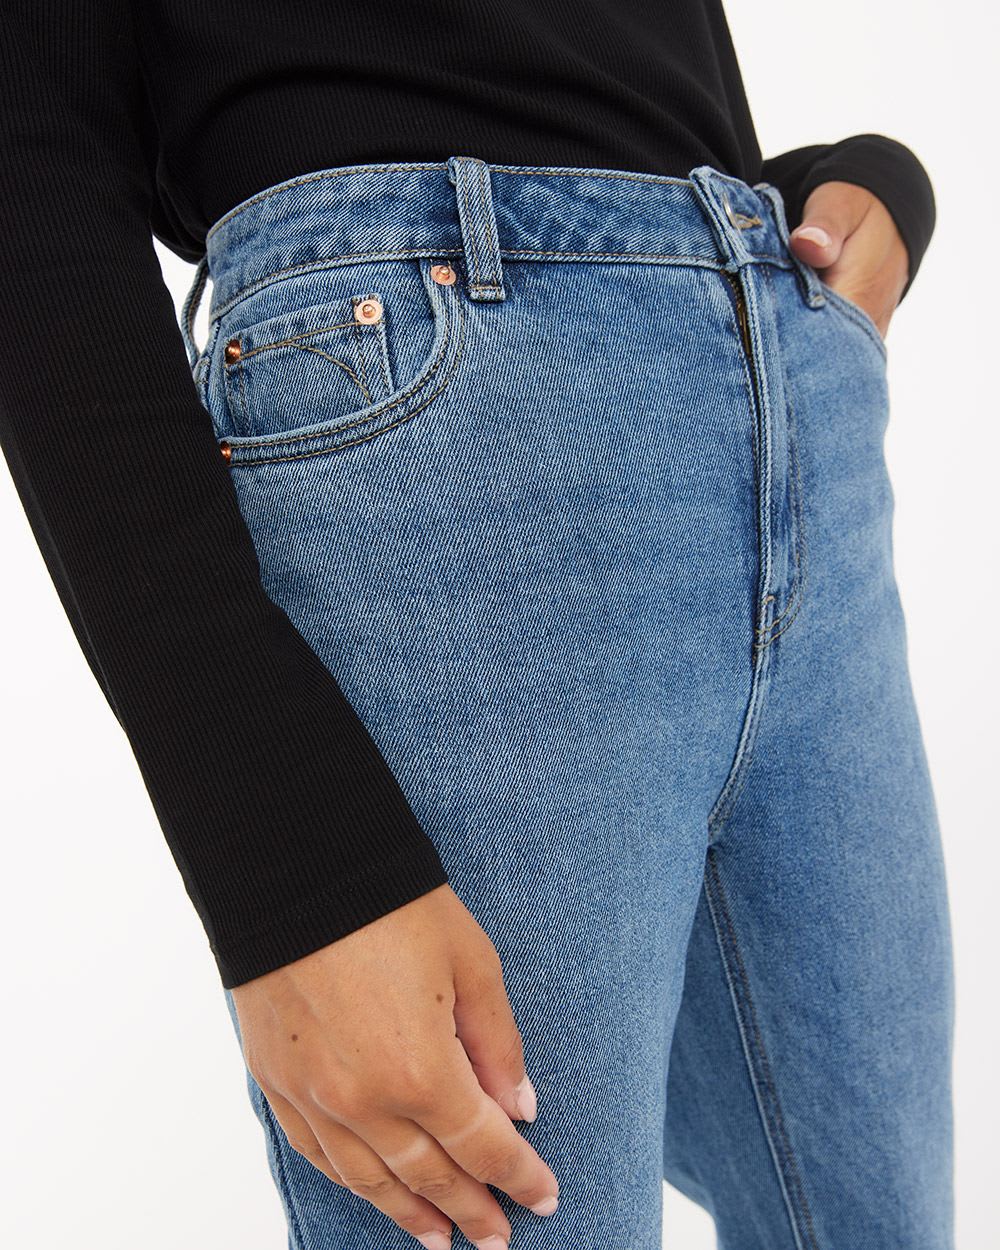 Super High-Rise Light Wash Jean, The Mom Jeans - Tall